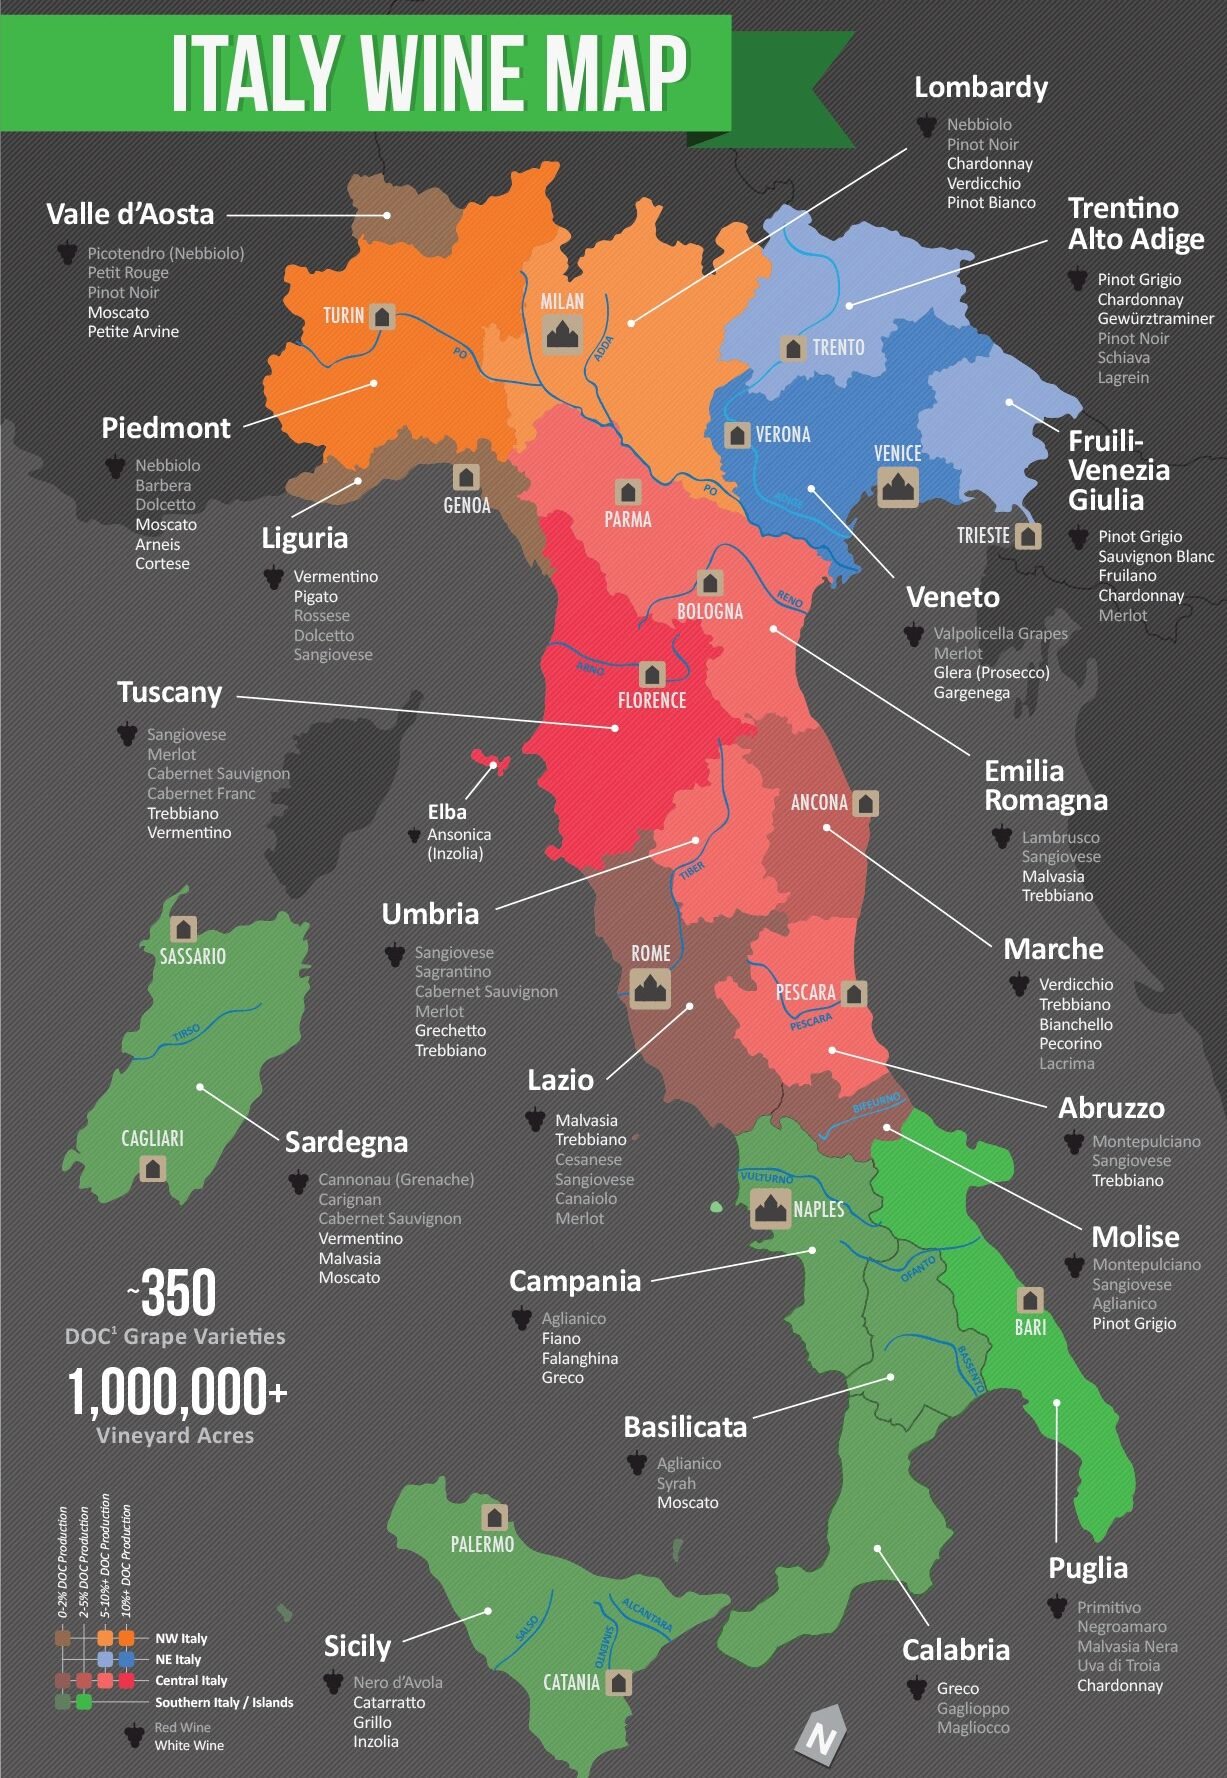 Italian wine, understanding the label and regions. ouritalianjourney.com - https://ouritalianjourney.com/italian-wine-classifications-how-to-understand-the-label